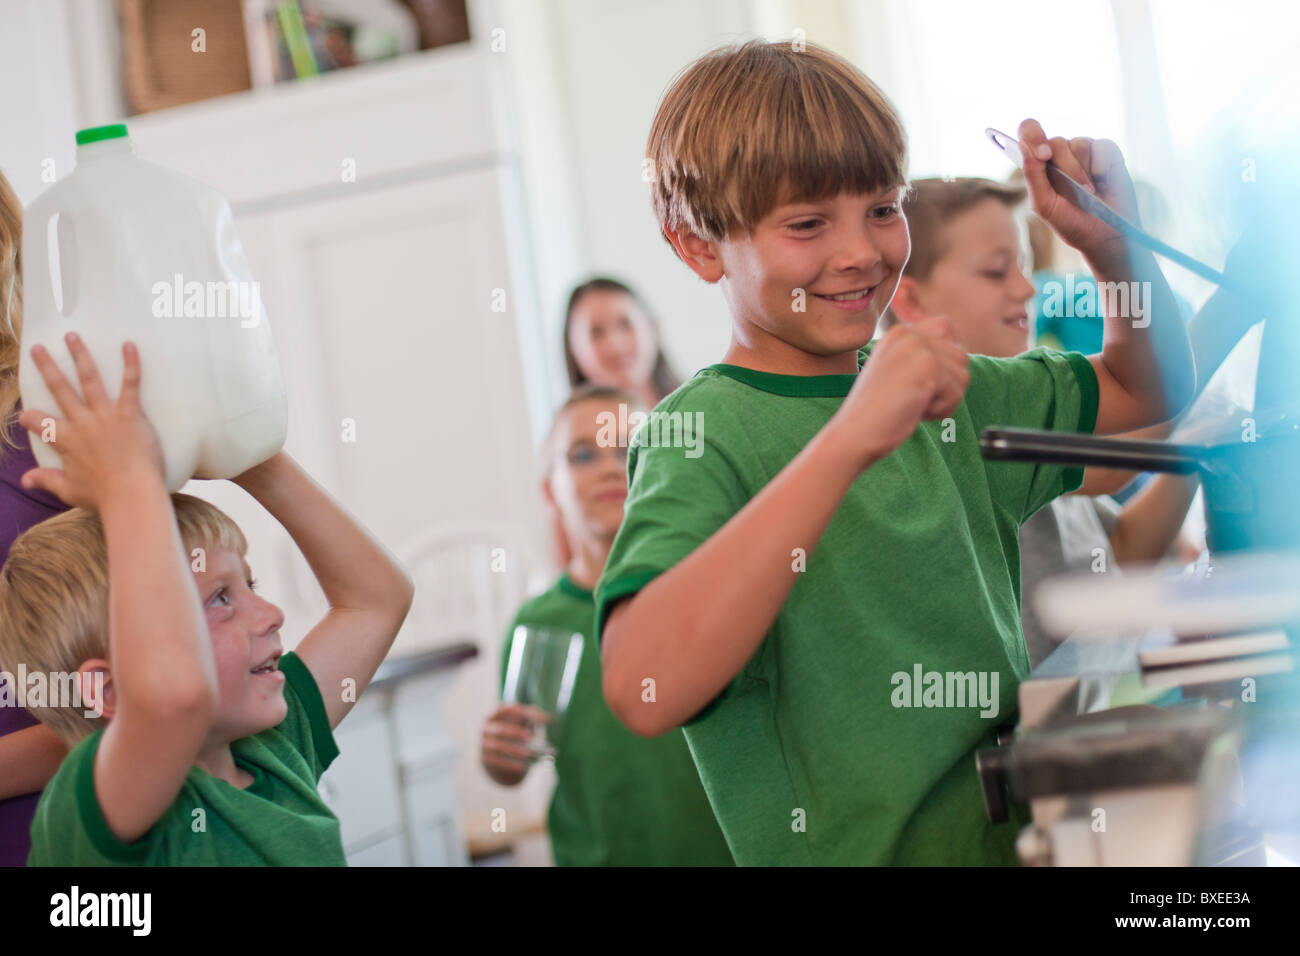 Group of children in kitchen Stock Photo